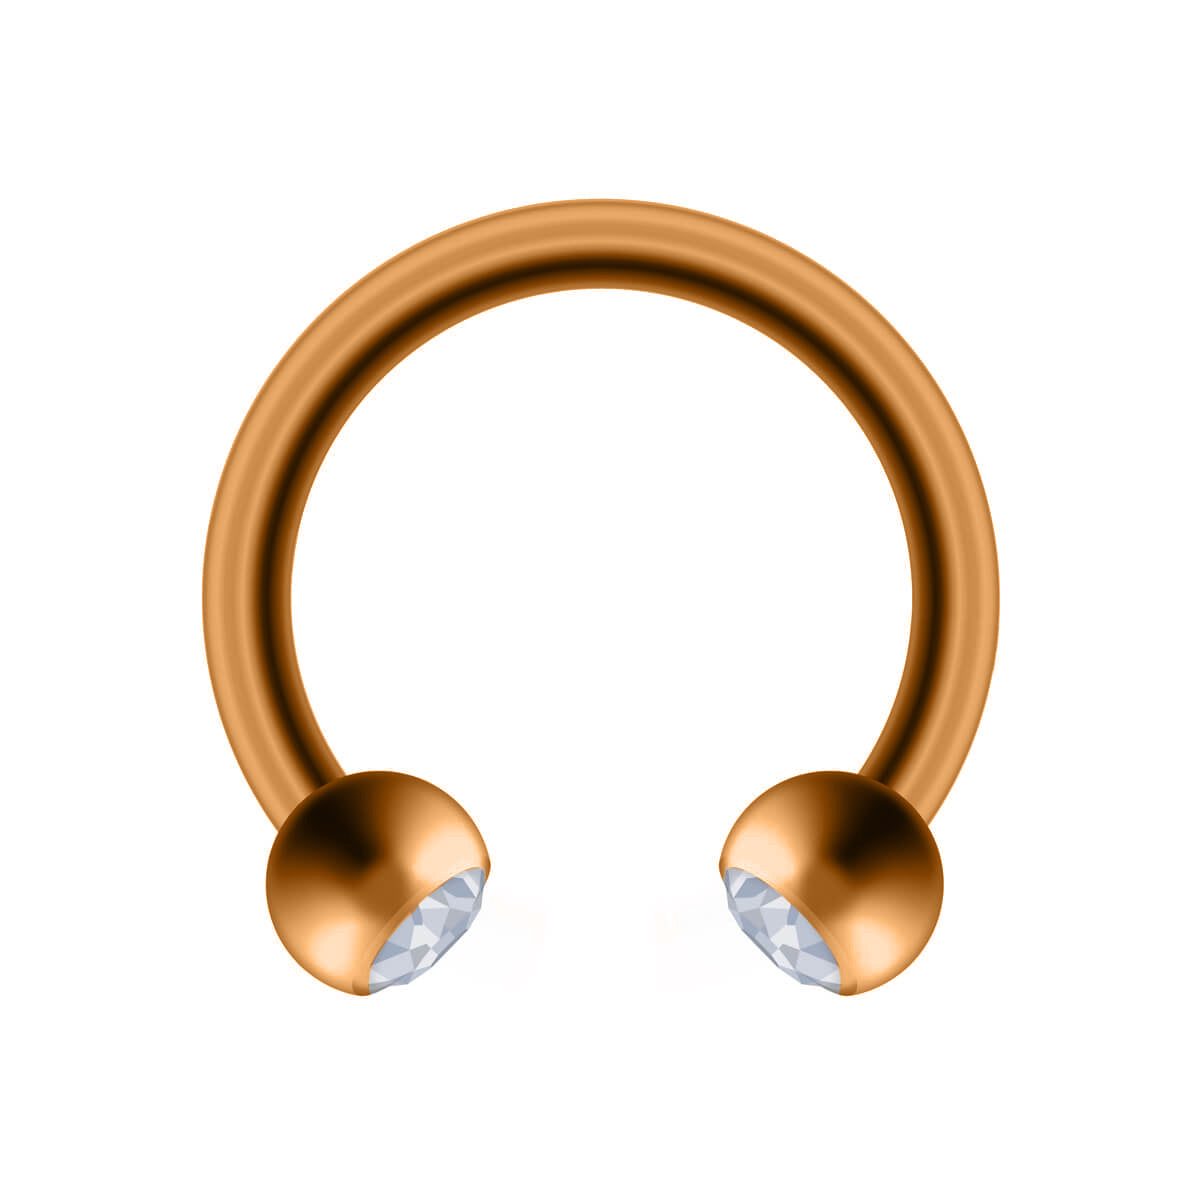 Horseshoe Gilded with Stones 1,2 mm (Steel 316L)